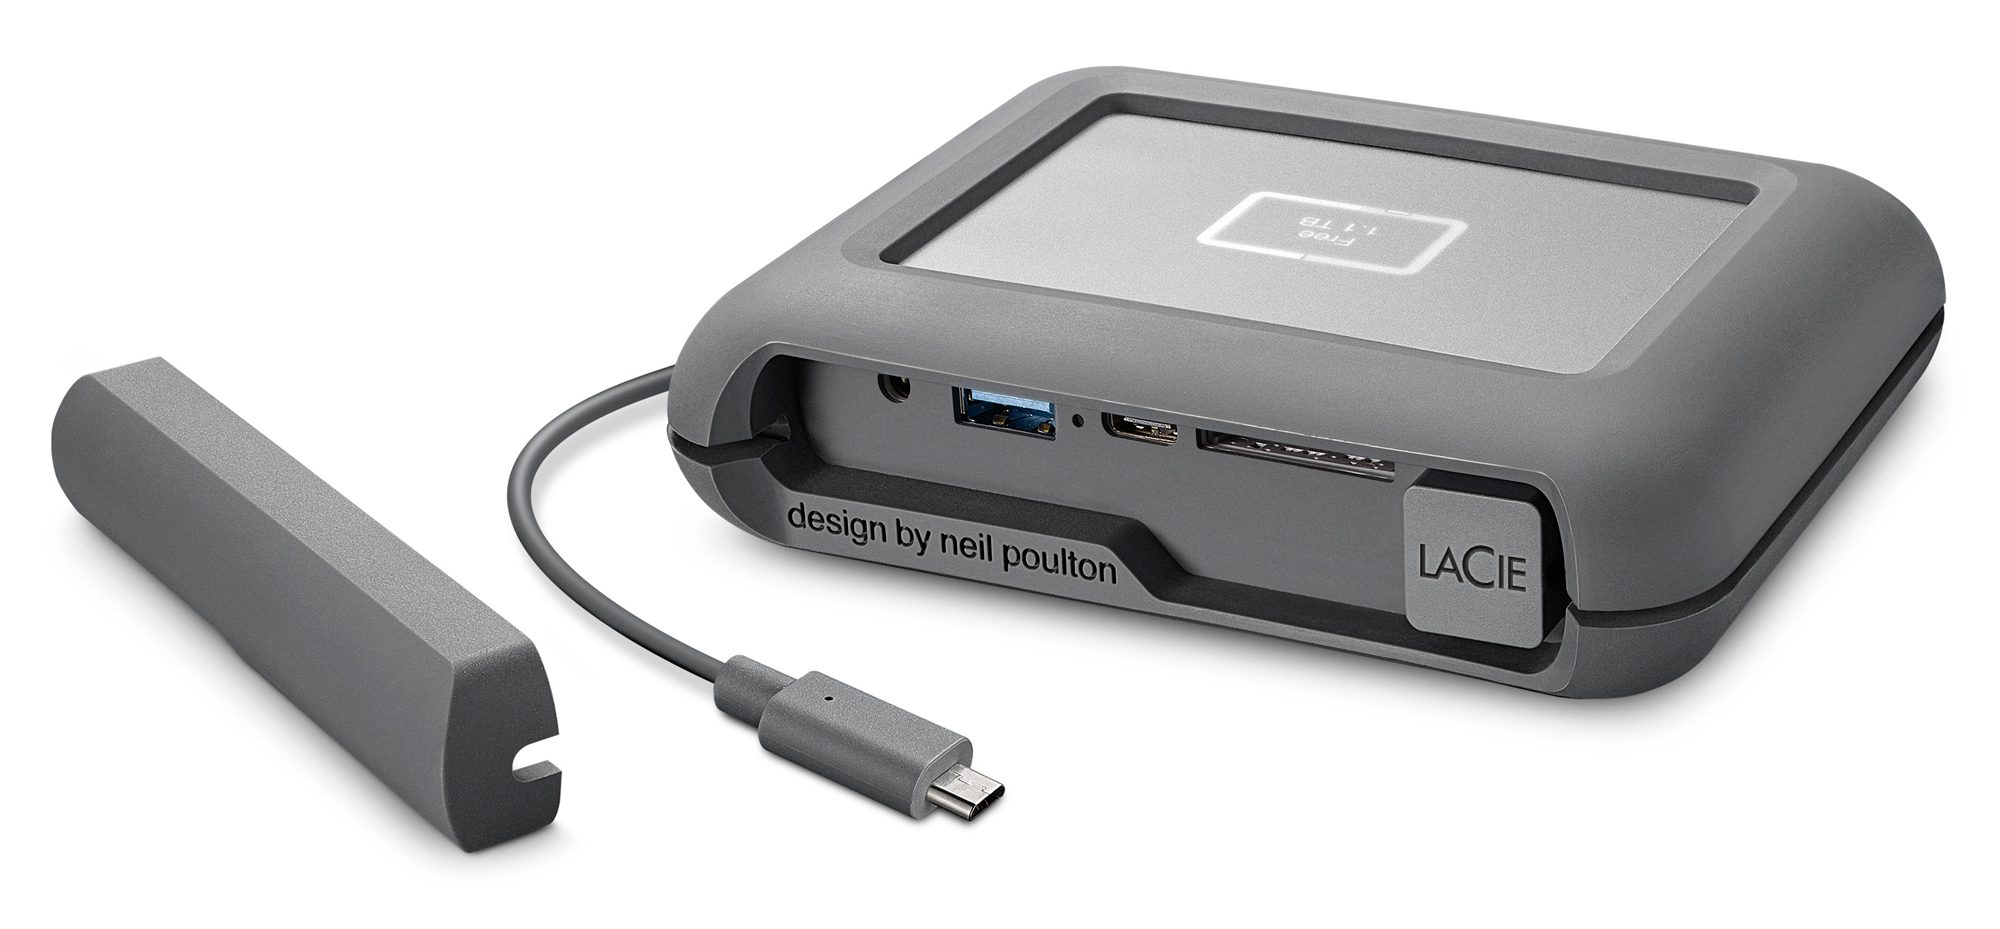 LaCie’s DJI Copilot is the Rugged Hard Drive you Want on the Job